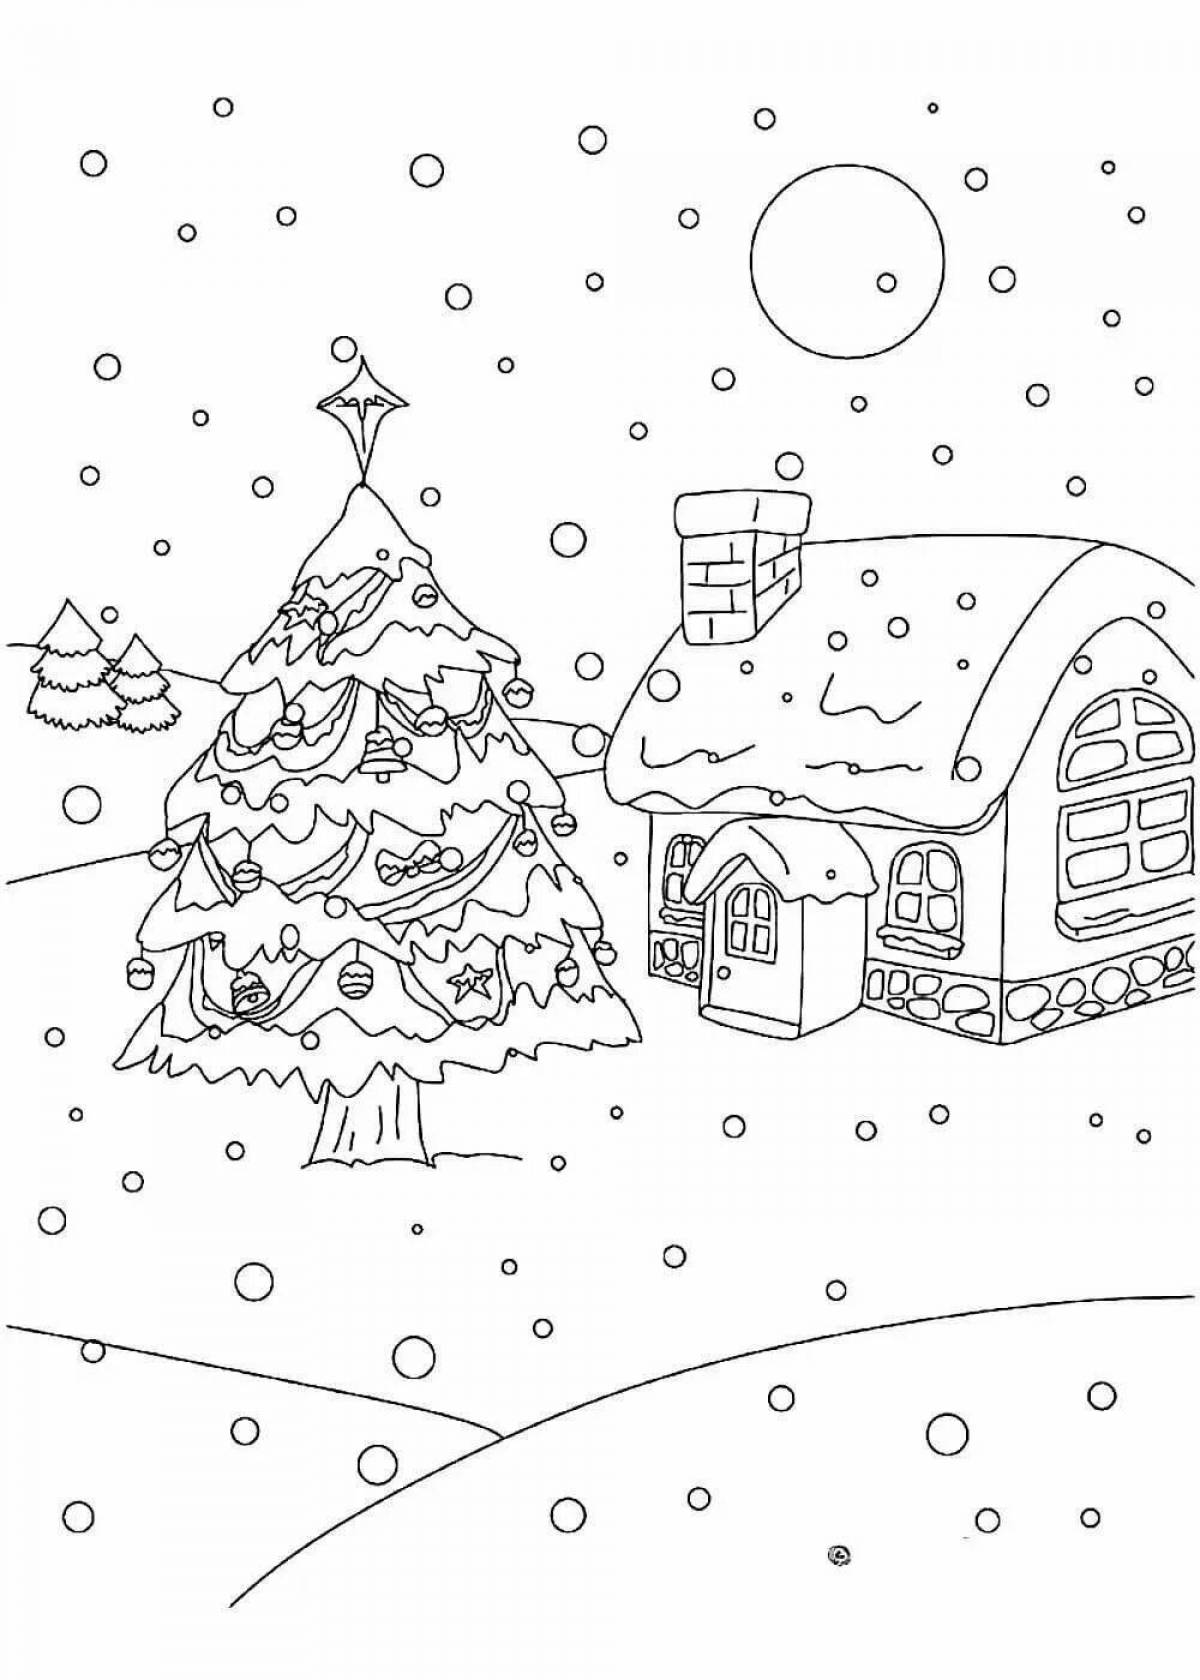 A fascinating coloring picture of a winter evening